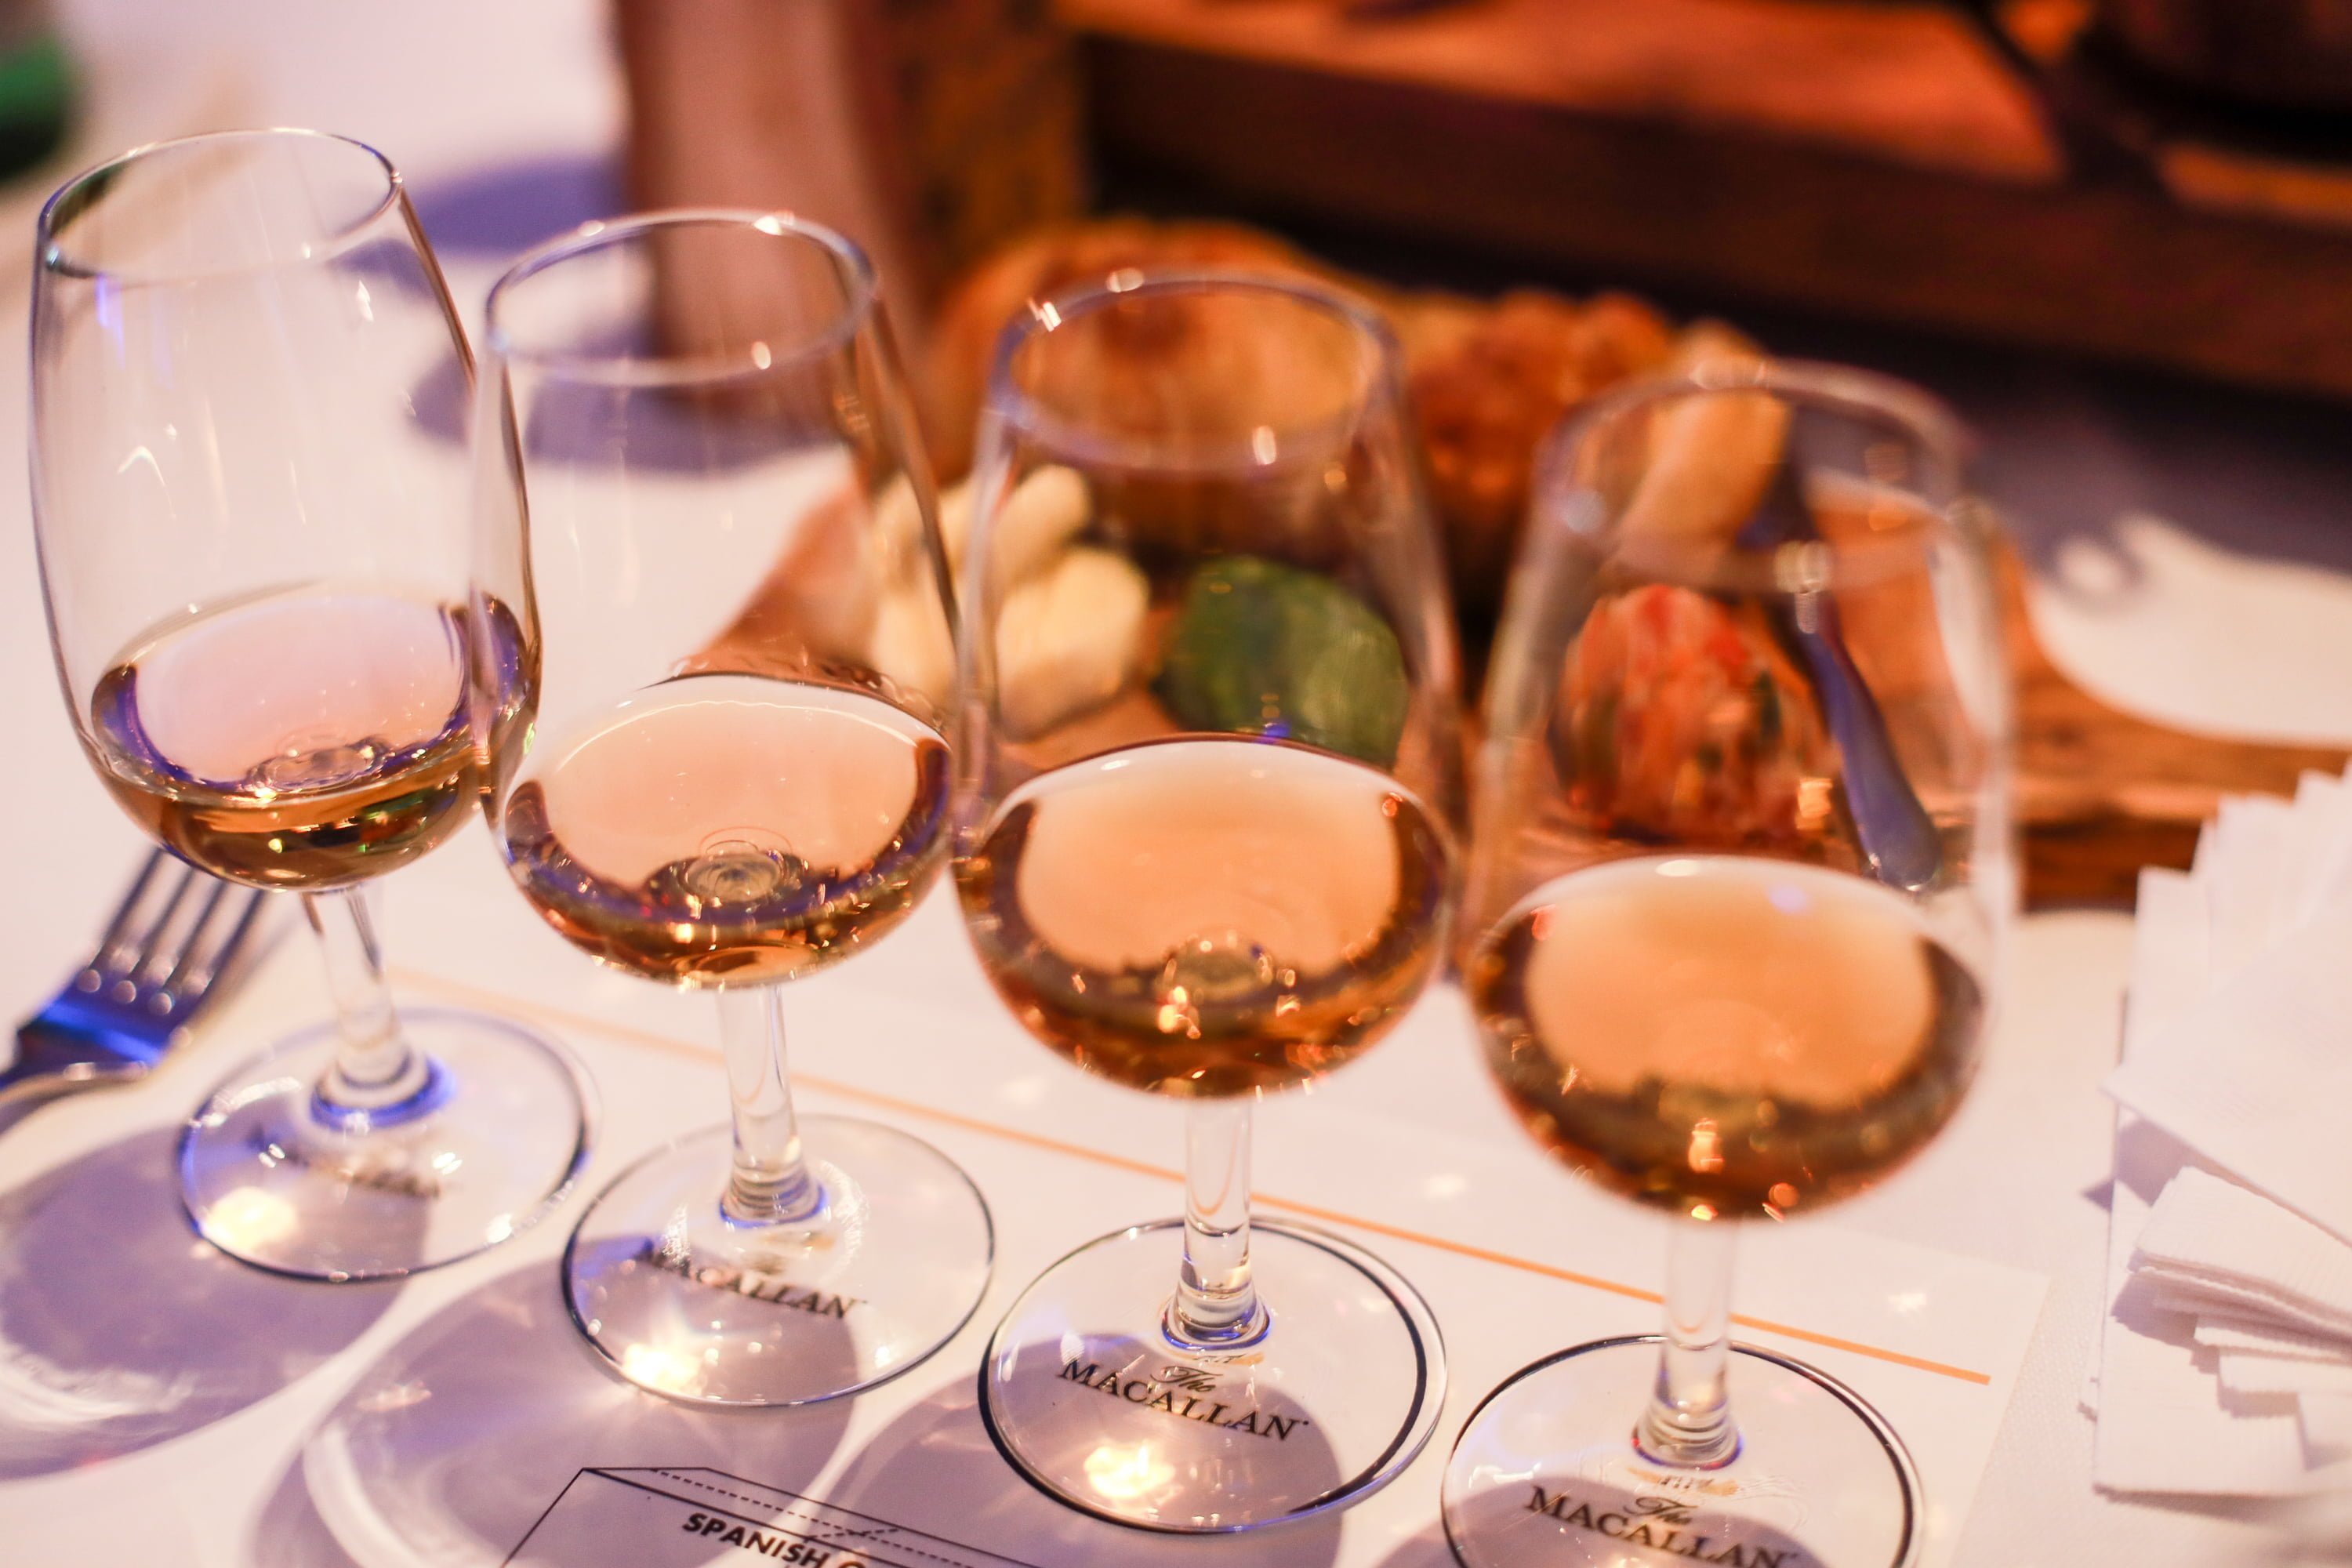 The Macallan whisky samples